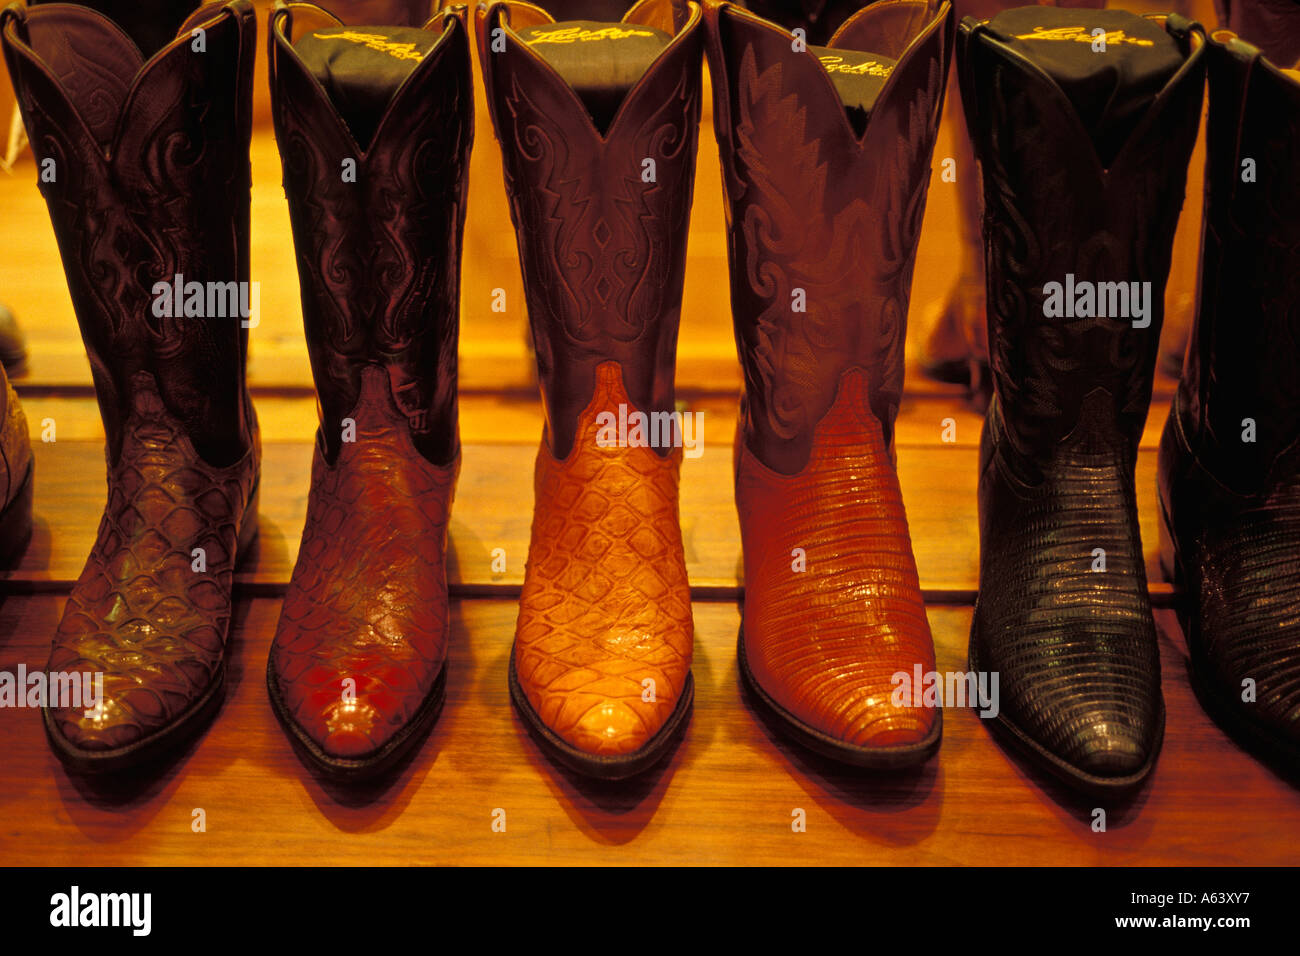 western boot manufacturers